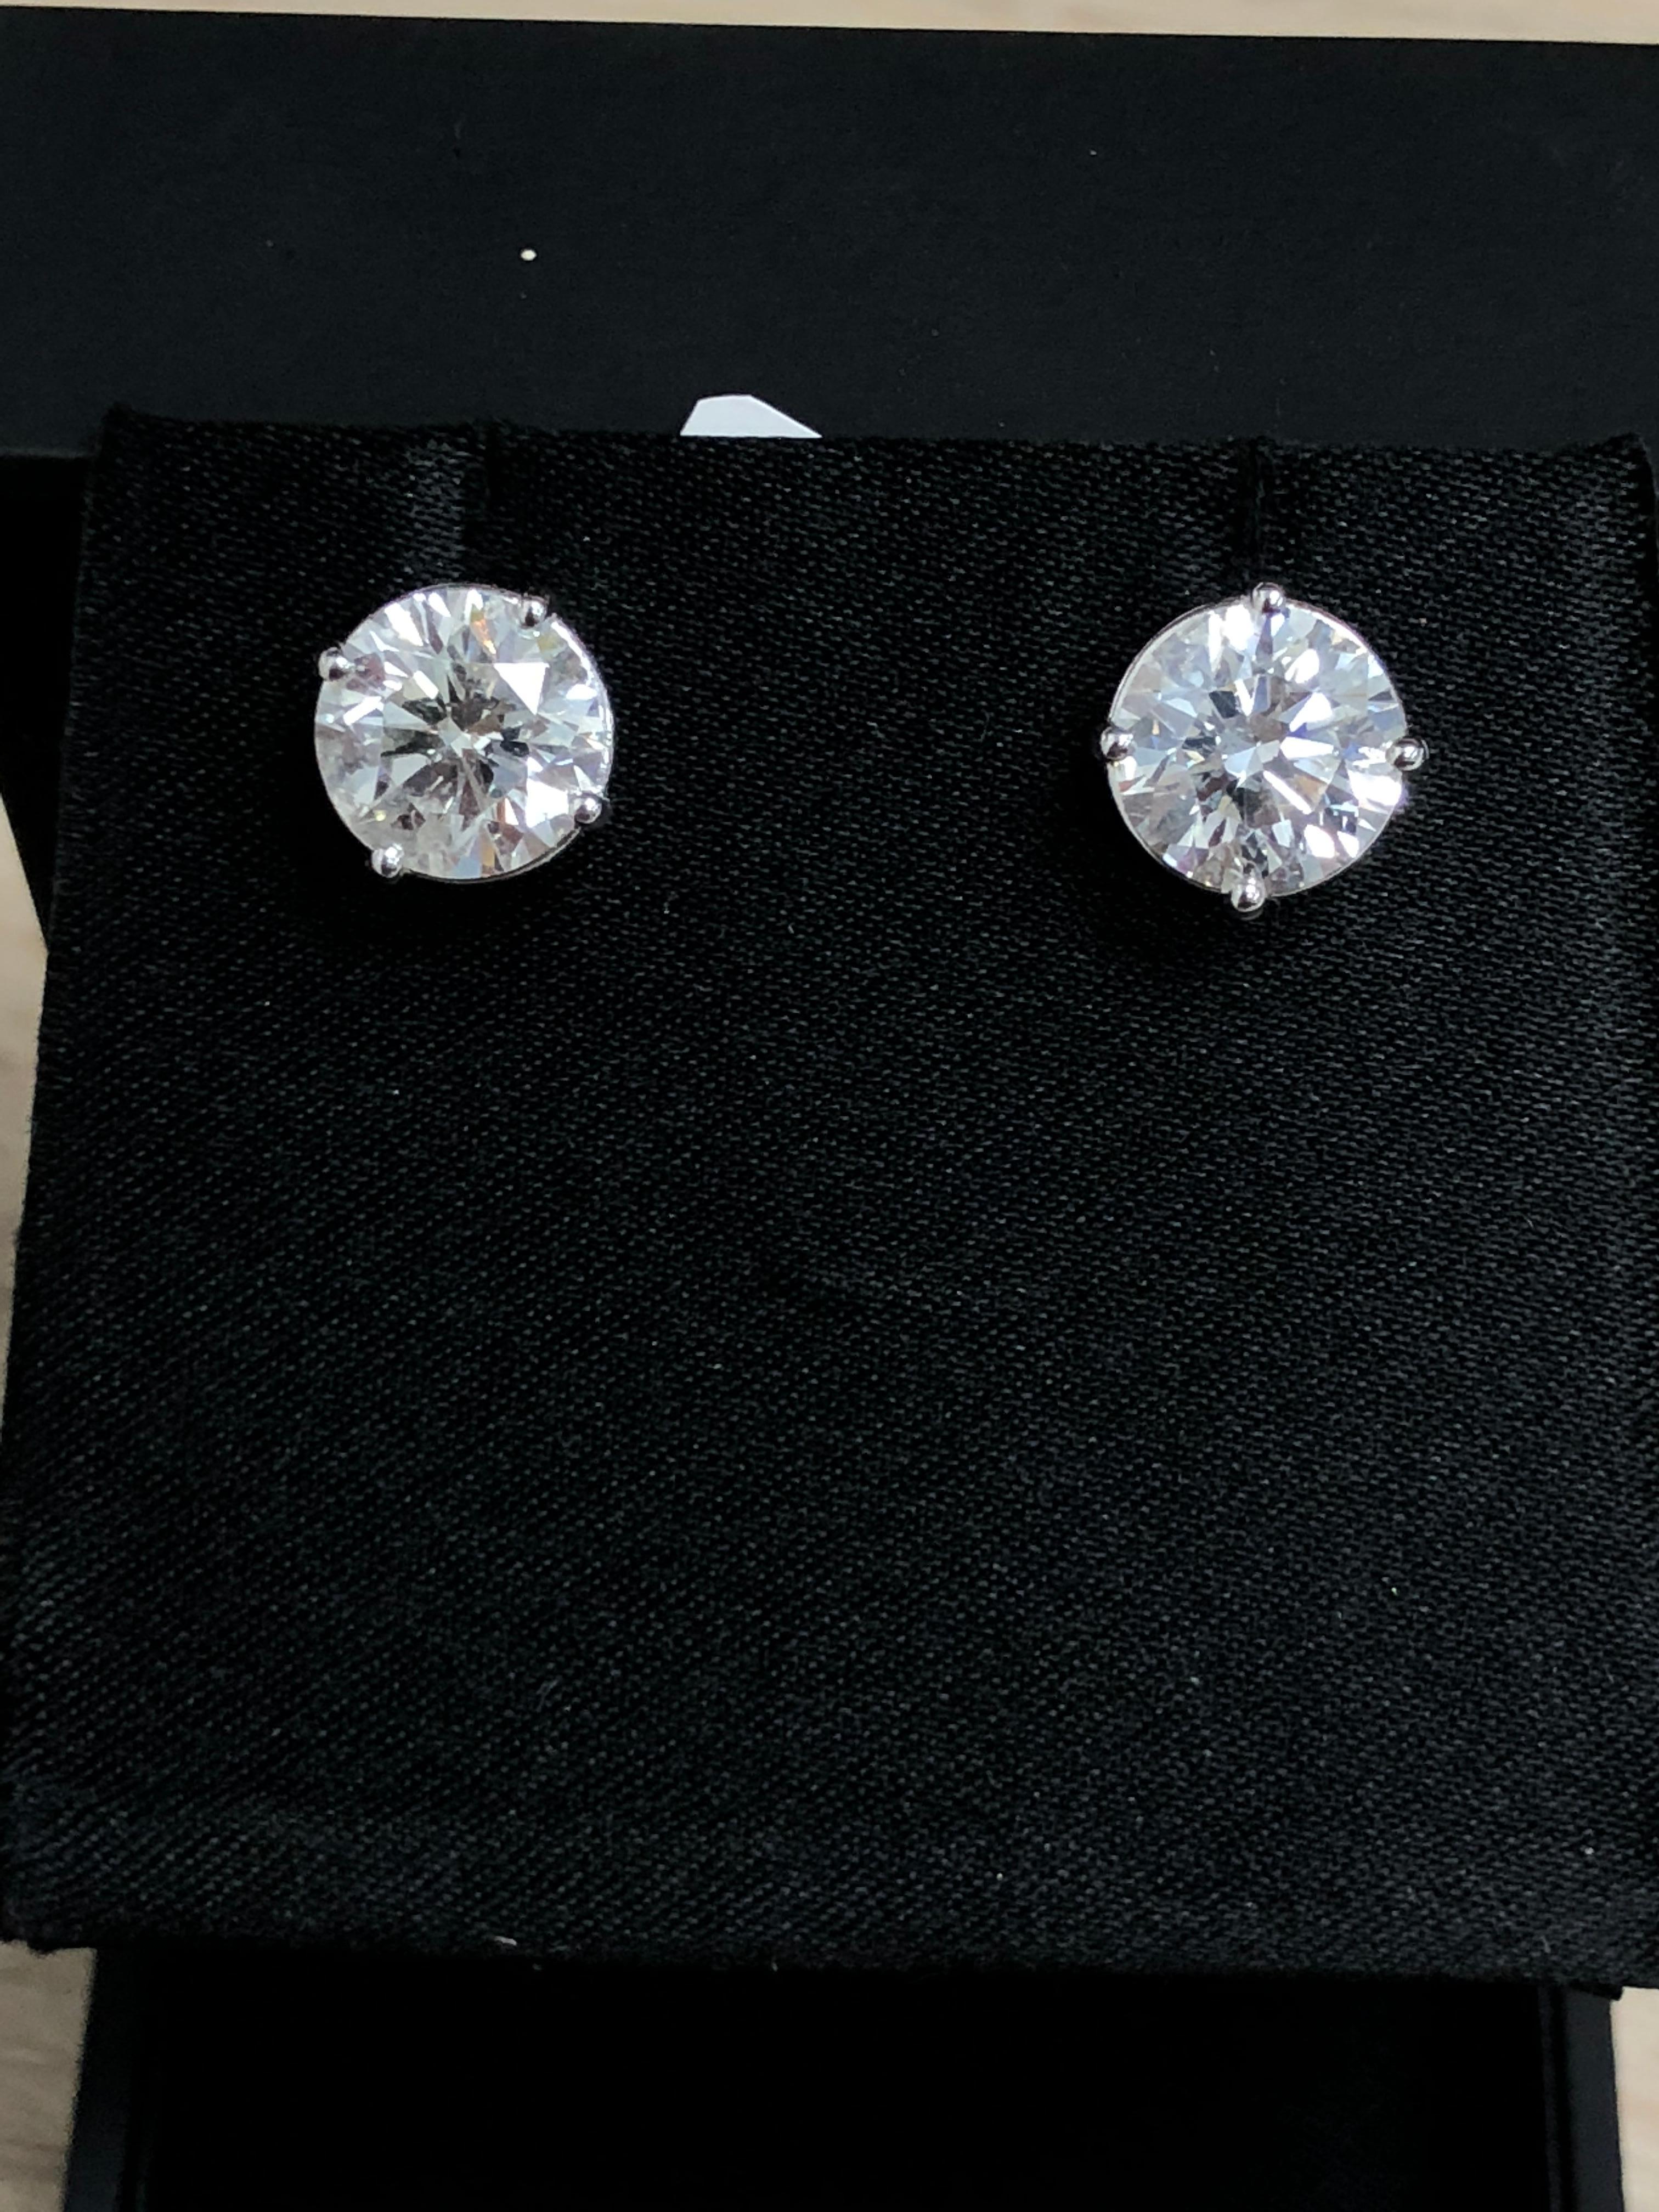 18K White gold Diamond stud earrings, set in a four prong mouting
The total diamond weight is 6.05 Carats. Ideal cut diamonds 
Near colorless white slightly included. 100% eye clean (H-I SI)
Certified by AAA Gemological appraisal laboratory 
